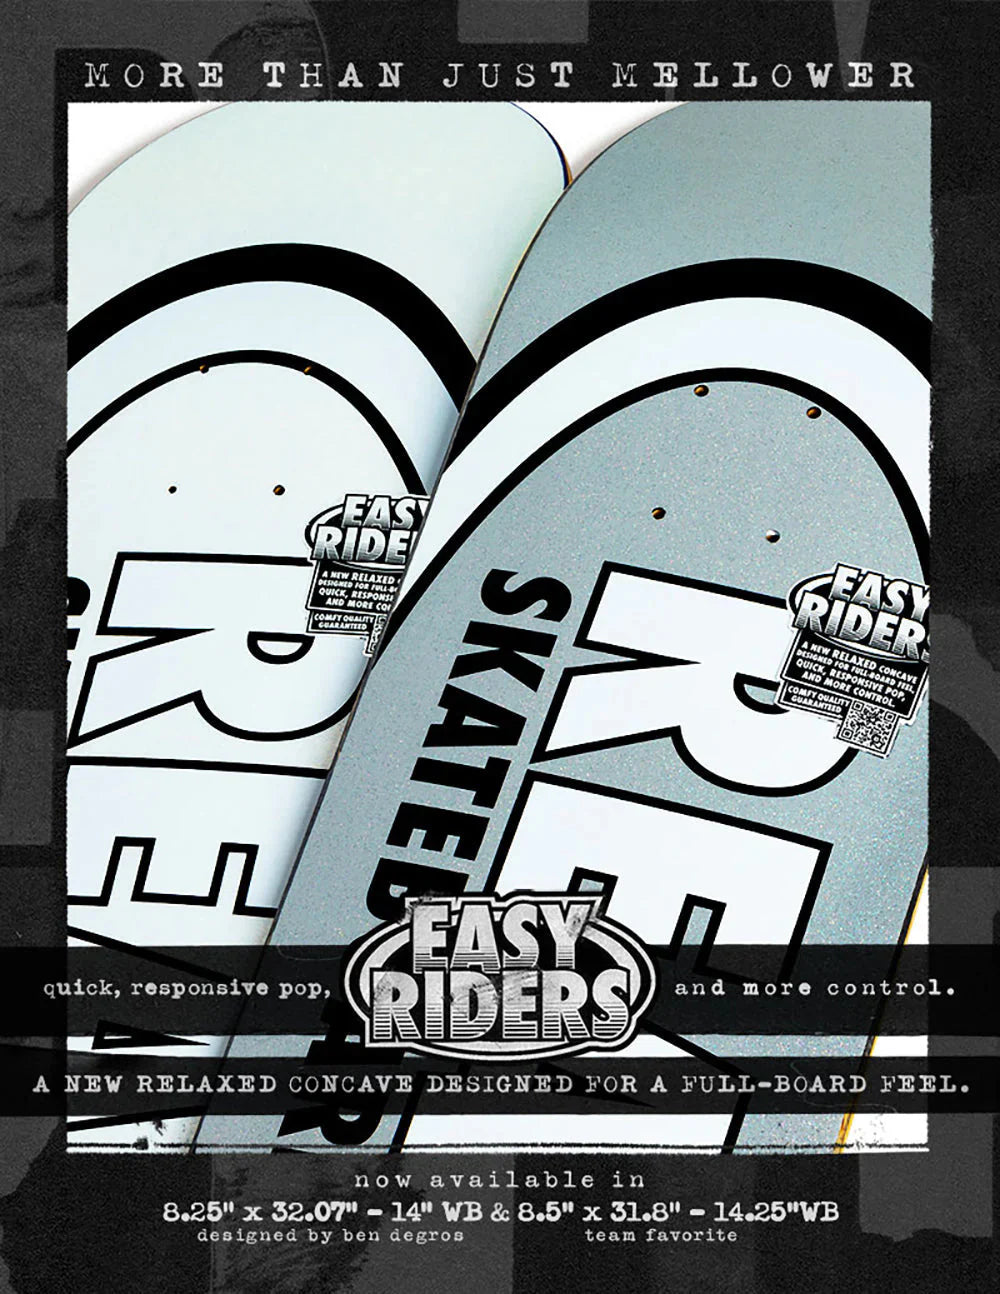 Real Deck Easyrider Oval 8.25" info guide